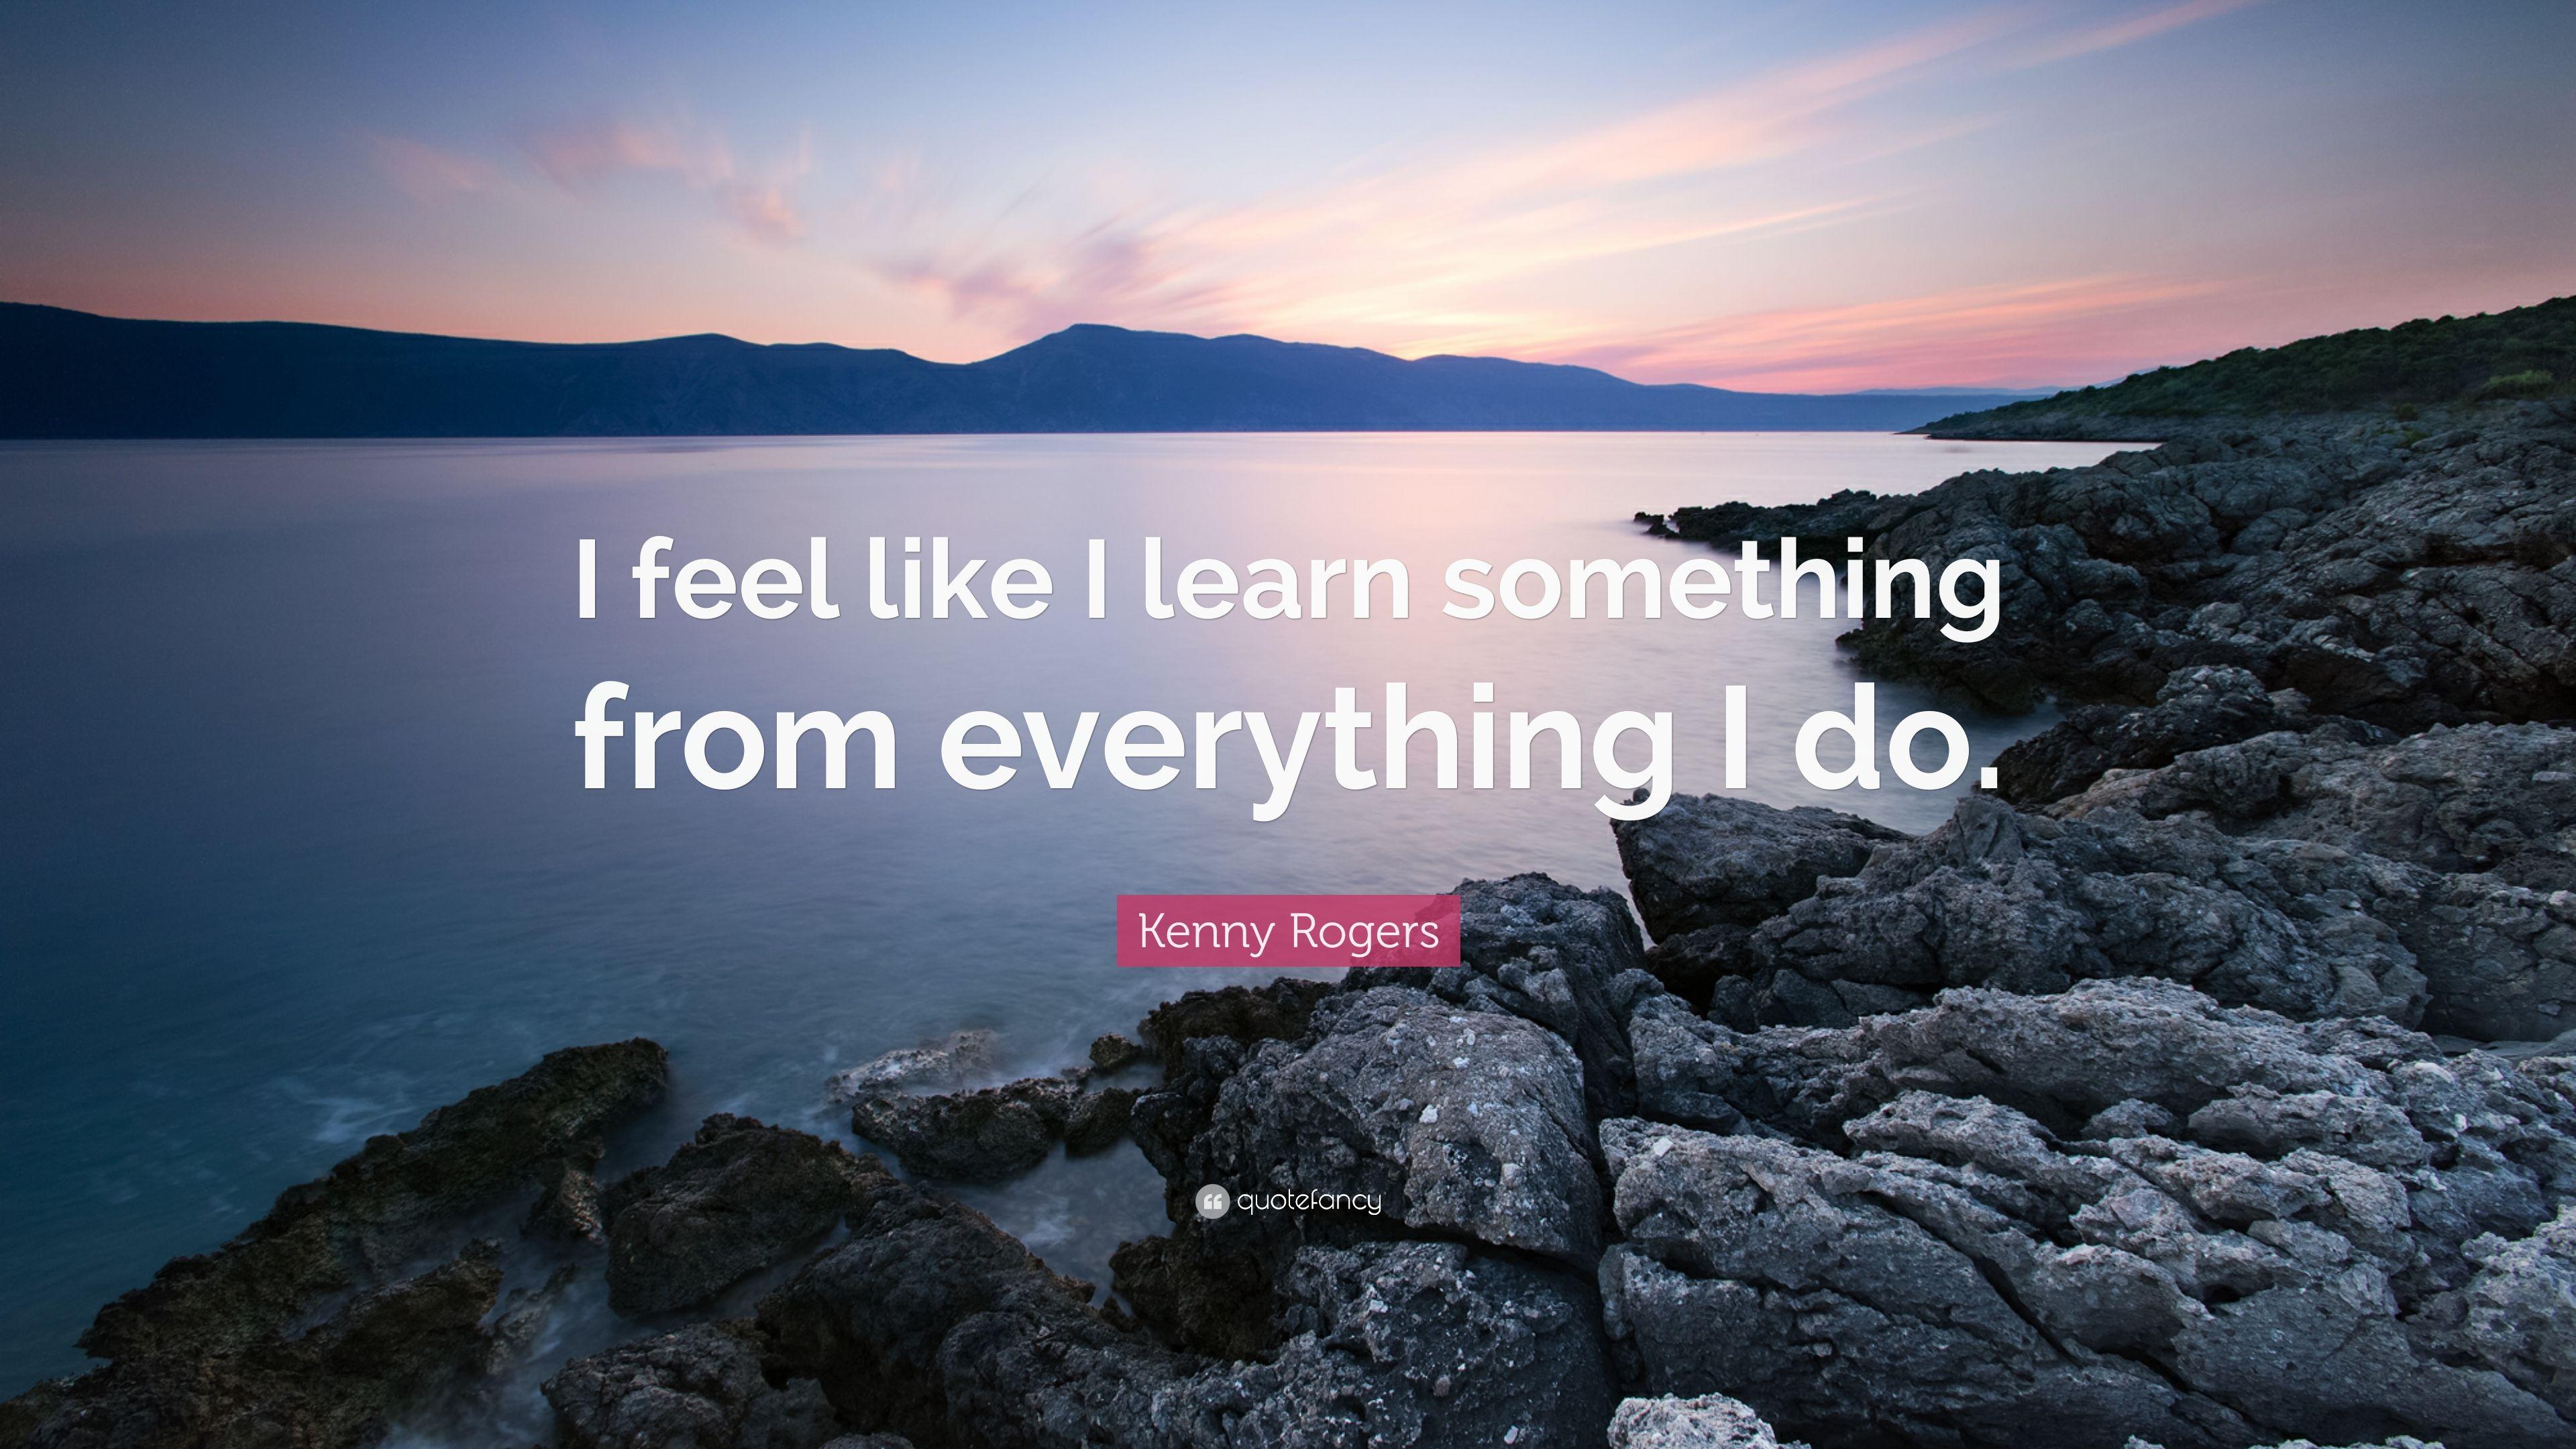 Kenny Rogers Quote: “I feel like I learn something from everything